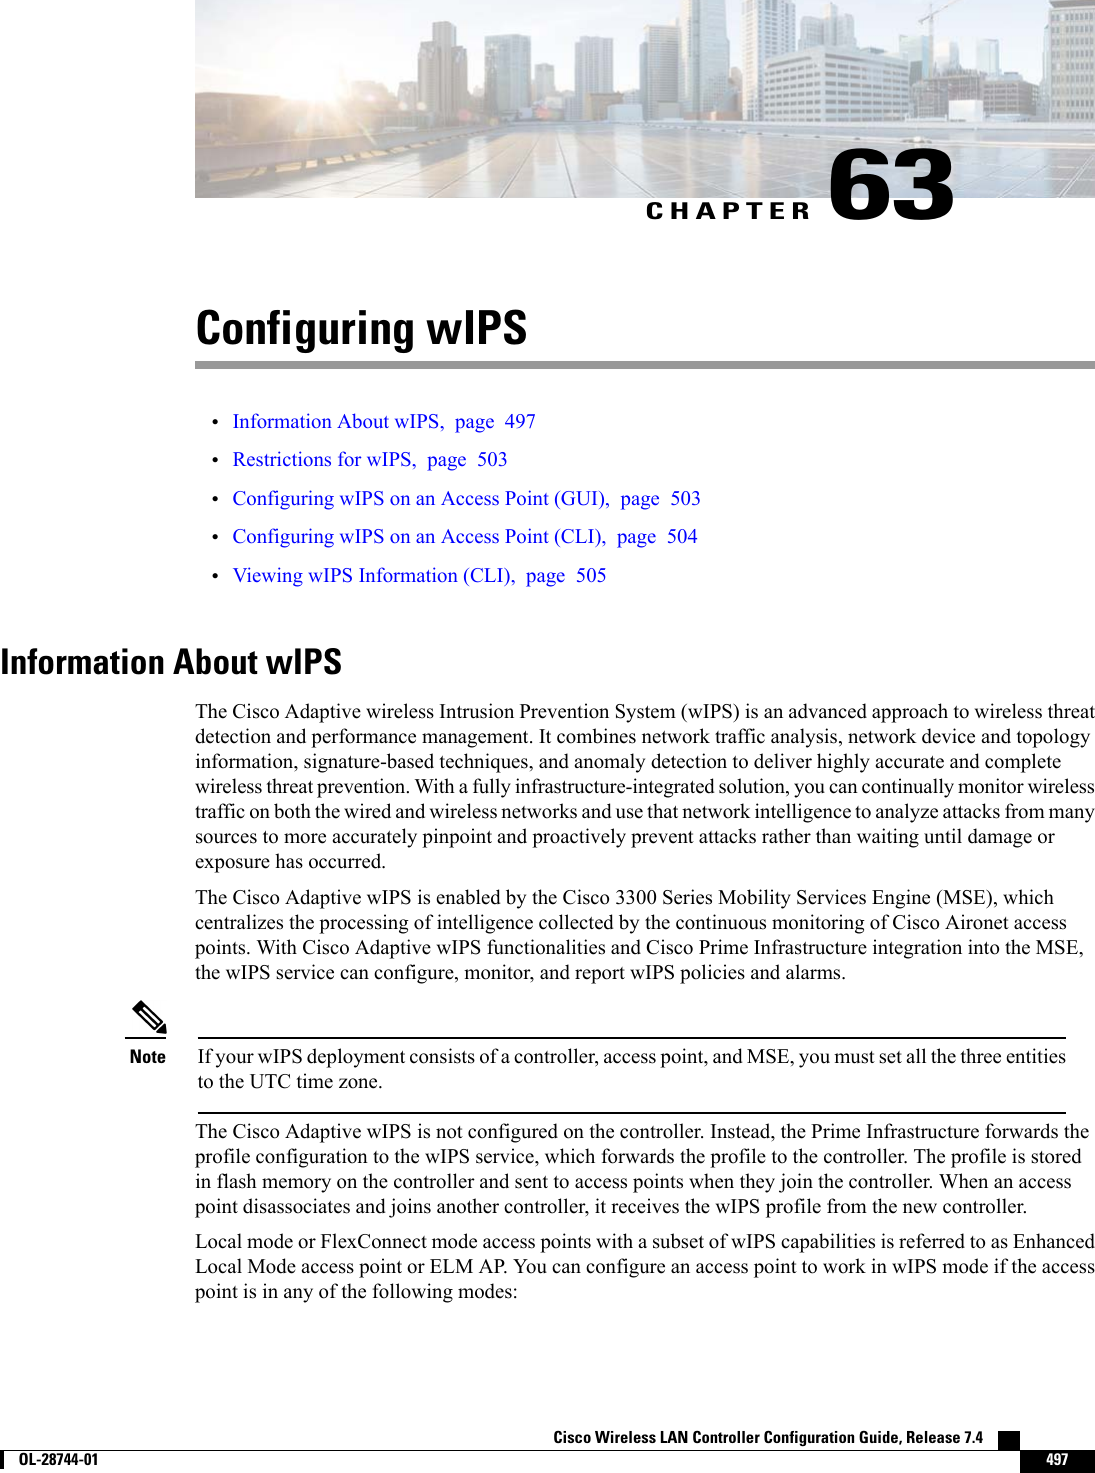 CHAPTER 63Configuring wIPS•Information About wIPS, page 497•Restrictions for wIPS, page 503•Configuring wIPS on an Access Point (GUI), page 503•Configuring wIPS on an Access Point (CLI), page 504•Viewing wIPS Information (CLI), page 505Information About wIPSThe Cisco Adaptive wireless Intrusion Prevention System (wIPS) is an advanced approach to wireless threatdetection and performance management. It combines network traffic analysis, network device and topologyinformation, signature-based techniques, and anomaly detection to deliver highly accurate and completewireless threat prevention. With a fully infrastructure-integrated solution, you can continually monitor wirelesstraffic on both the wired and wireless networks and use that network intelligence to analyze attacks from manysources to more accurately pinpoint and proactively prevent attacks rather than waiting until damage orexposure has occurred.The Cisco Adaptive wIPS is enabled by the Cisco 3300 Series Mobility Services Engine (MSE), whichcentralizes the processing of intelligence collected by the continuous monitoring of Cisco Aironet accesspoints. With Cisco Adaptive wIPS functionalities and Cisco Prime Infrastructure integration into the MSE,the wIPS service can configure, monitor, and report wIPS policies and alarms.If your wIPS deployment consists of a controller, access point, and MSE, you must set all the three entitiesto the UTC time zone.NoteThe Cisco Adaptive wIPS is not configured on the controller. Instead, the Prime Infrastructure forwards theprofile configuration to the wIPS service, which forwards the profile to the controller. The profile is storedin flash memory on the controller and sent to access points when they join the controller. When an accesspoint disassociates and joins another controller, it receives the wIPS profile from the new controller.Local mode or FlexConnect mode access points with a subset of wIPS capabilities is referred to as EnhancedLocal Mode access point or ELM AP. You can configure an access point to work in wIPS mode if the accesspoint is in any of the following modes:Cisco Wireless LAN Controller Configuration Guide, Release 7.4        OL-28744-01 497